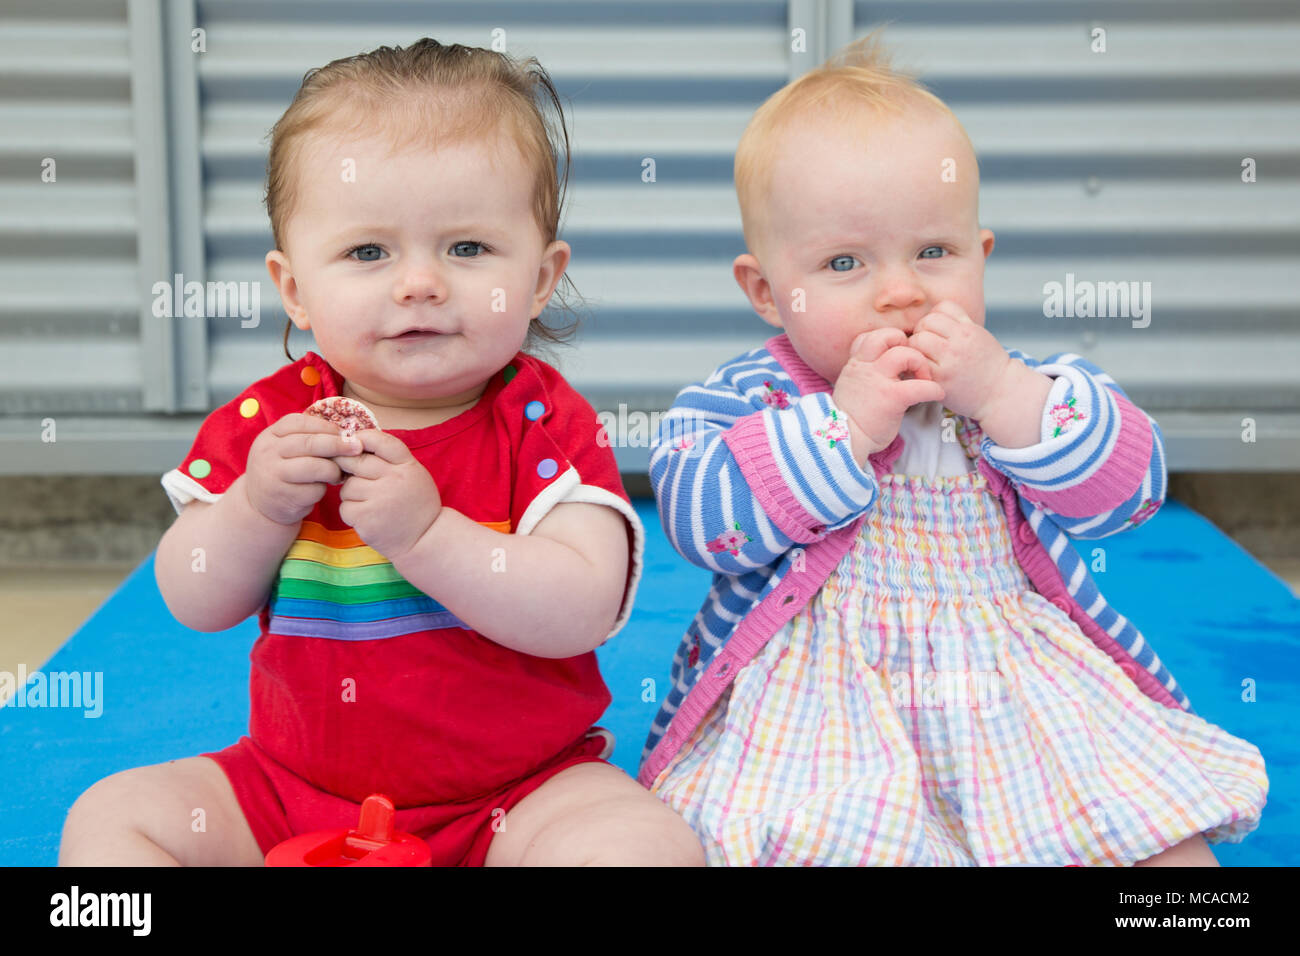 Twins 10 months old Stock Photo